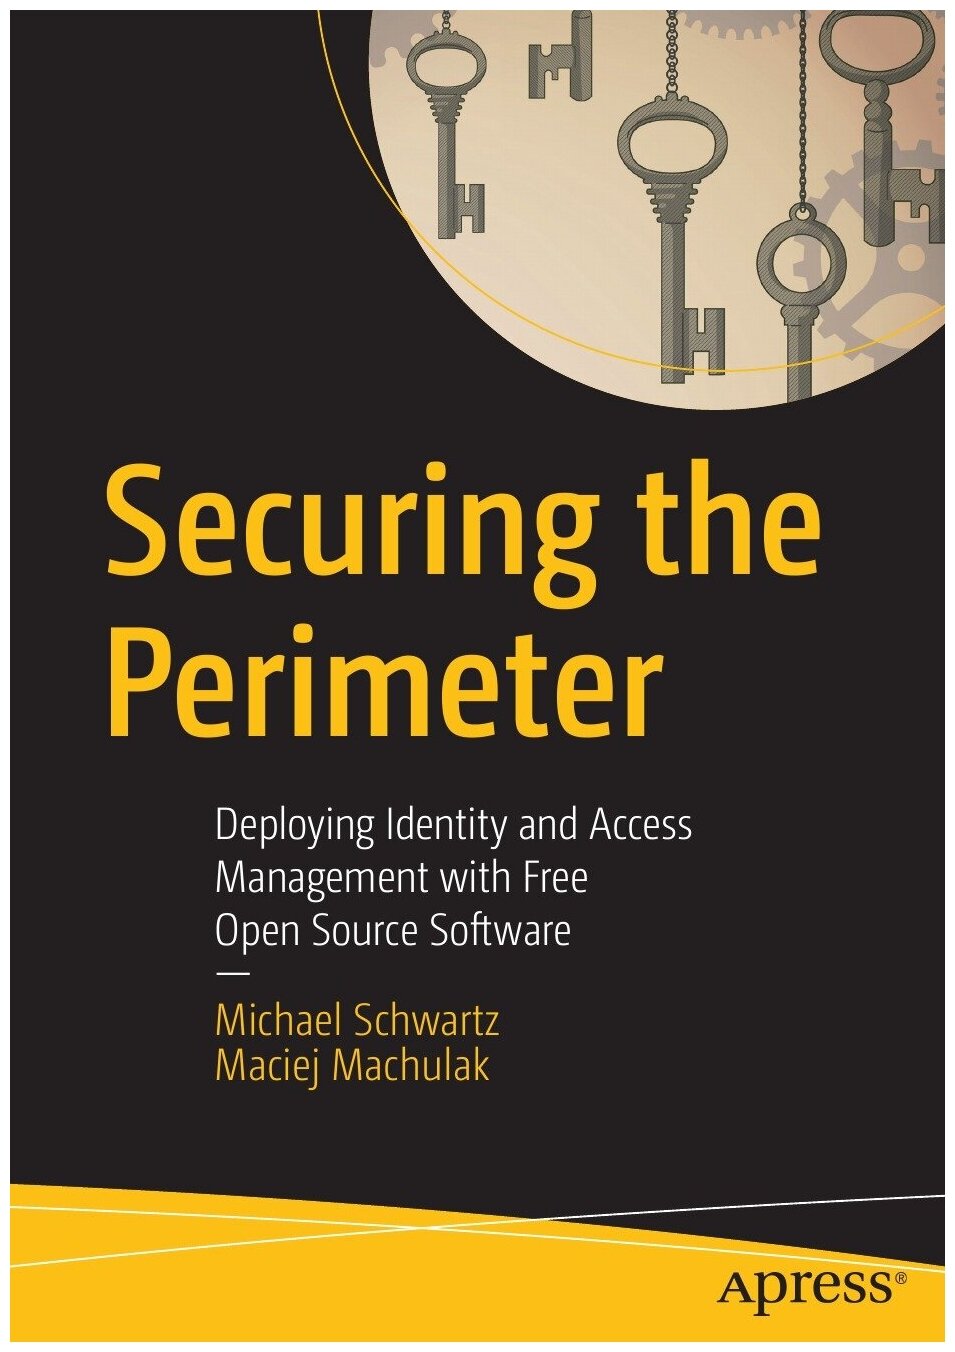 Securing the Perimeter. Deploying Identity and Access Management with Free Open Source Software